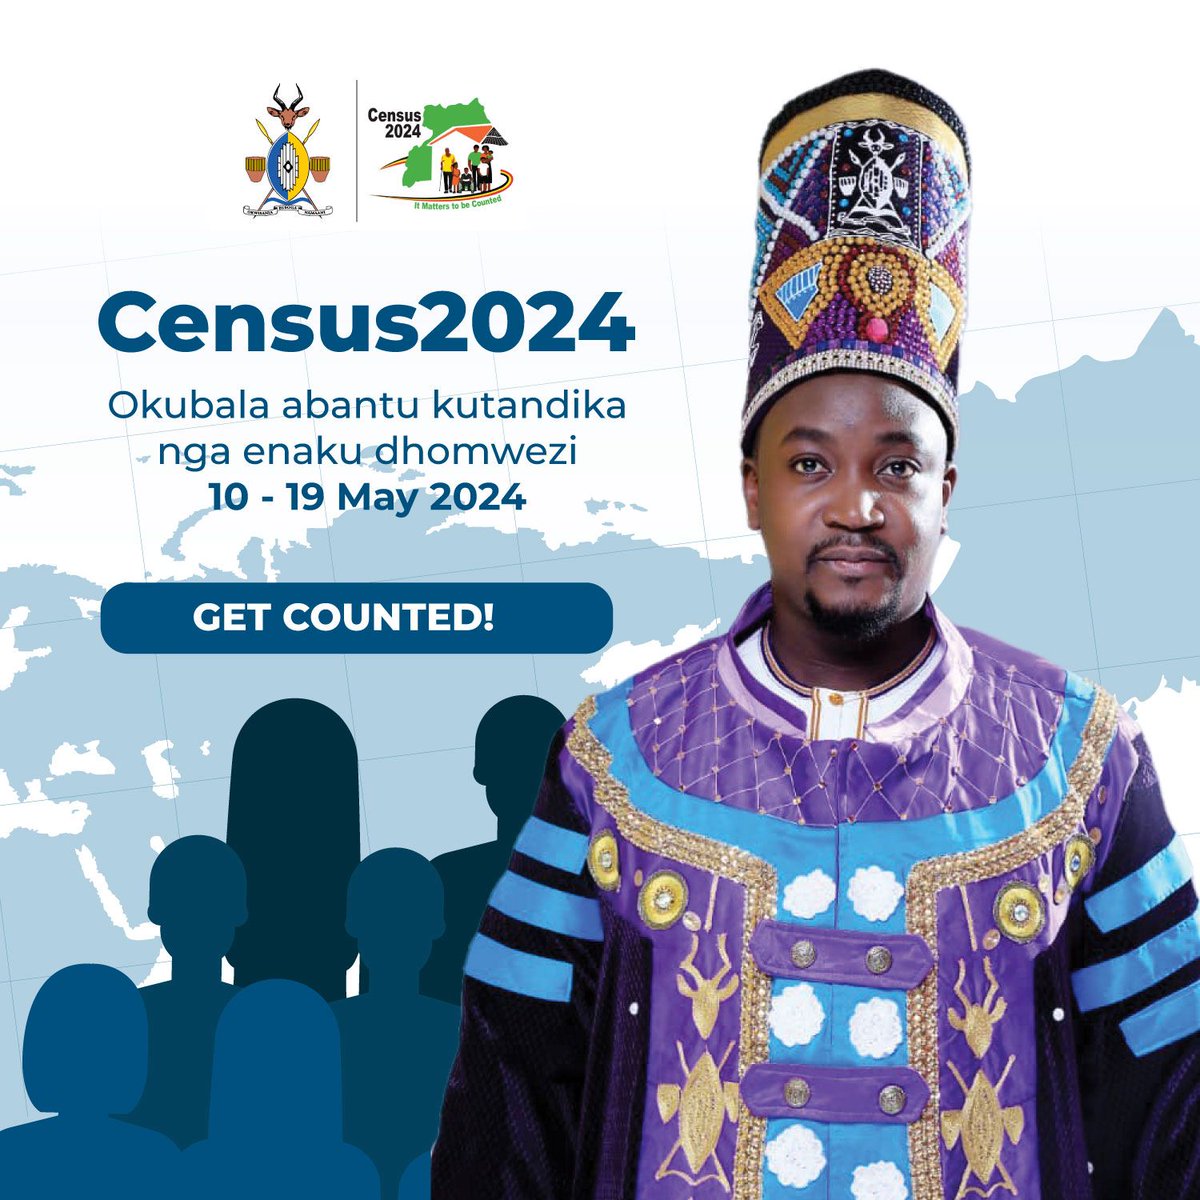 I call upon you all Ugandans, especially Abasoga, to participate in the census on May 10th. 'If you work outside Busoga, return for the census night and sleep in Busoga on May 9th. For Busoga's development!' - @KingNadiopeIV #UgandaCensus2024